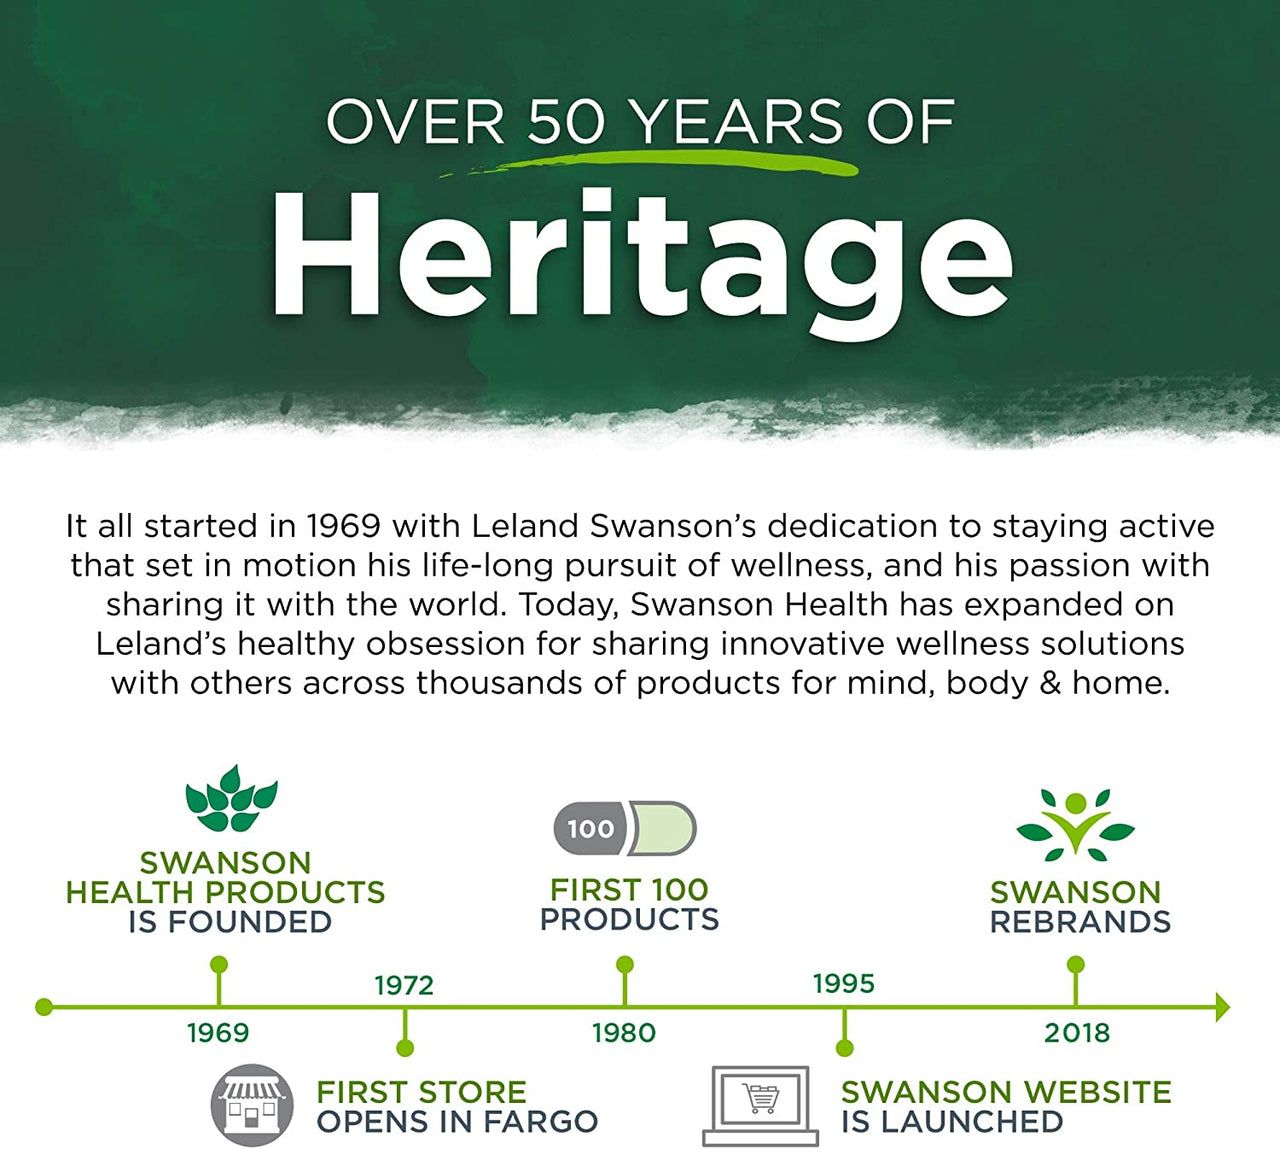 Over 50 years of Swanson's 5-HTP Extra Strength - 100 mg 60 capsules heritage.